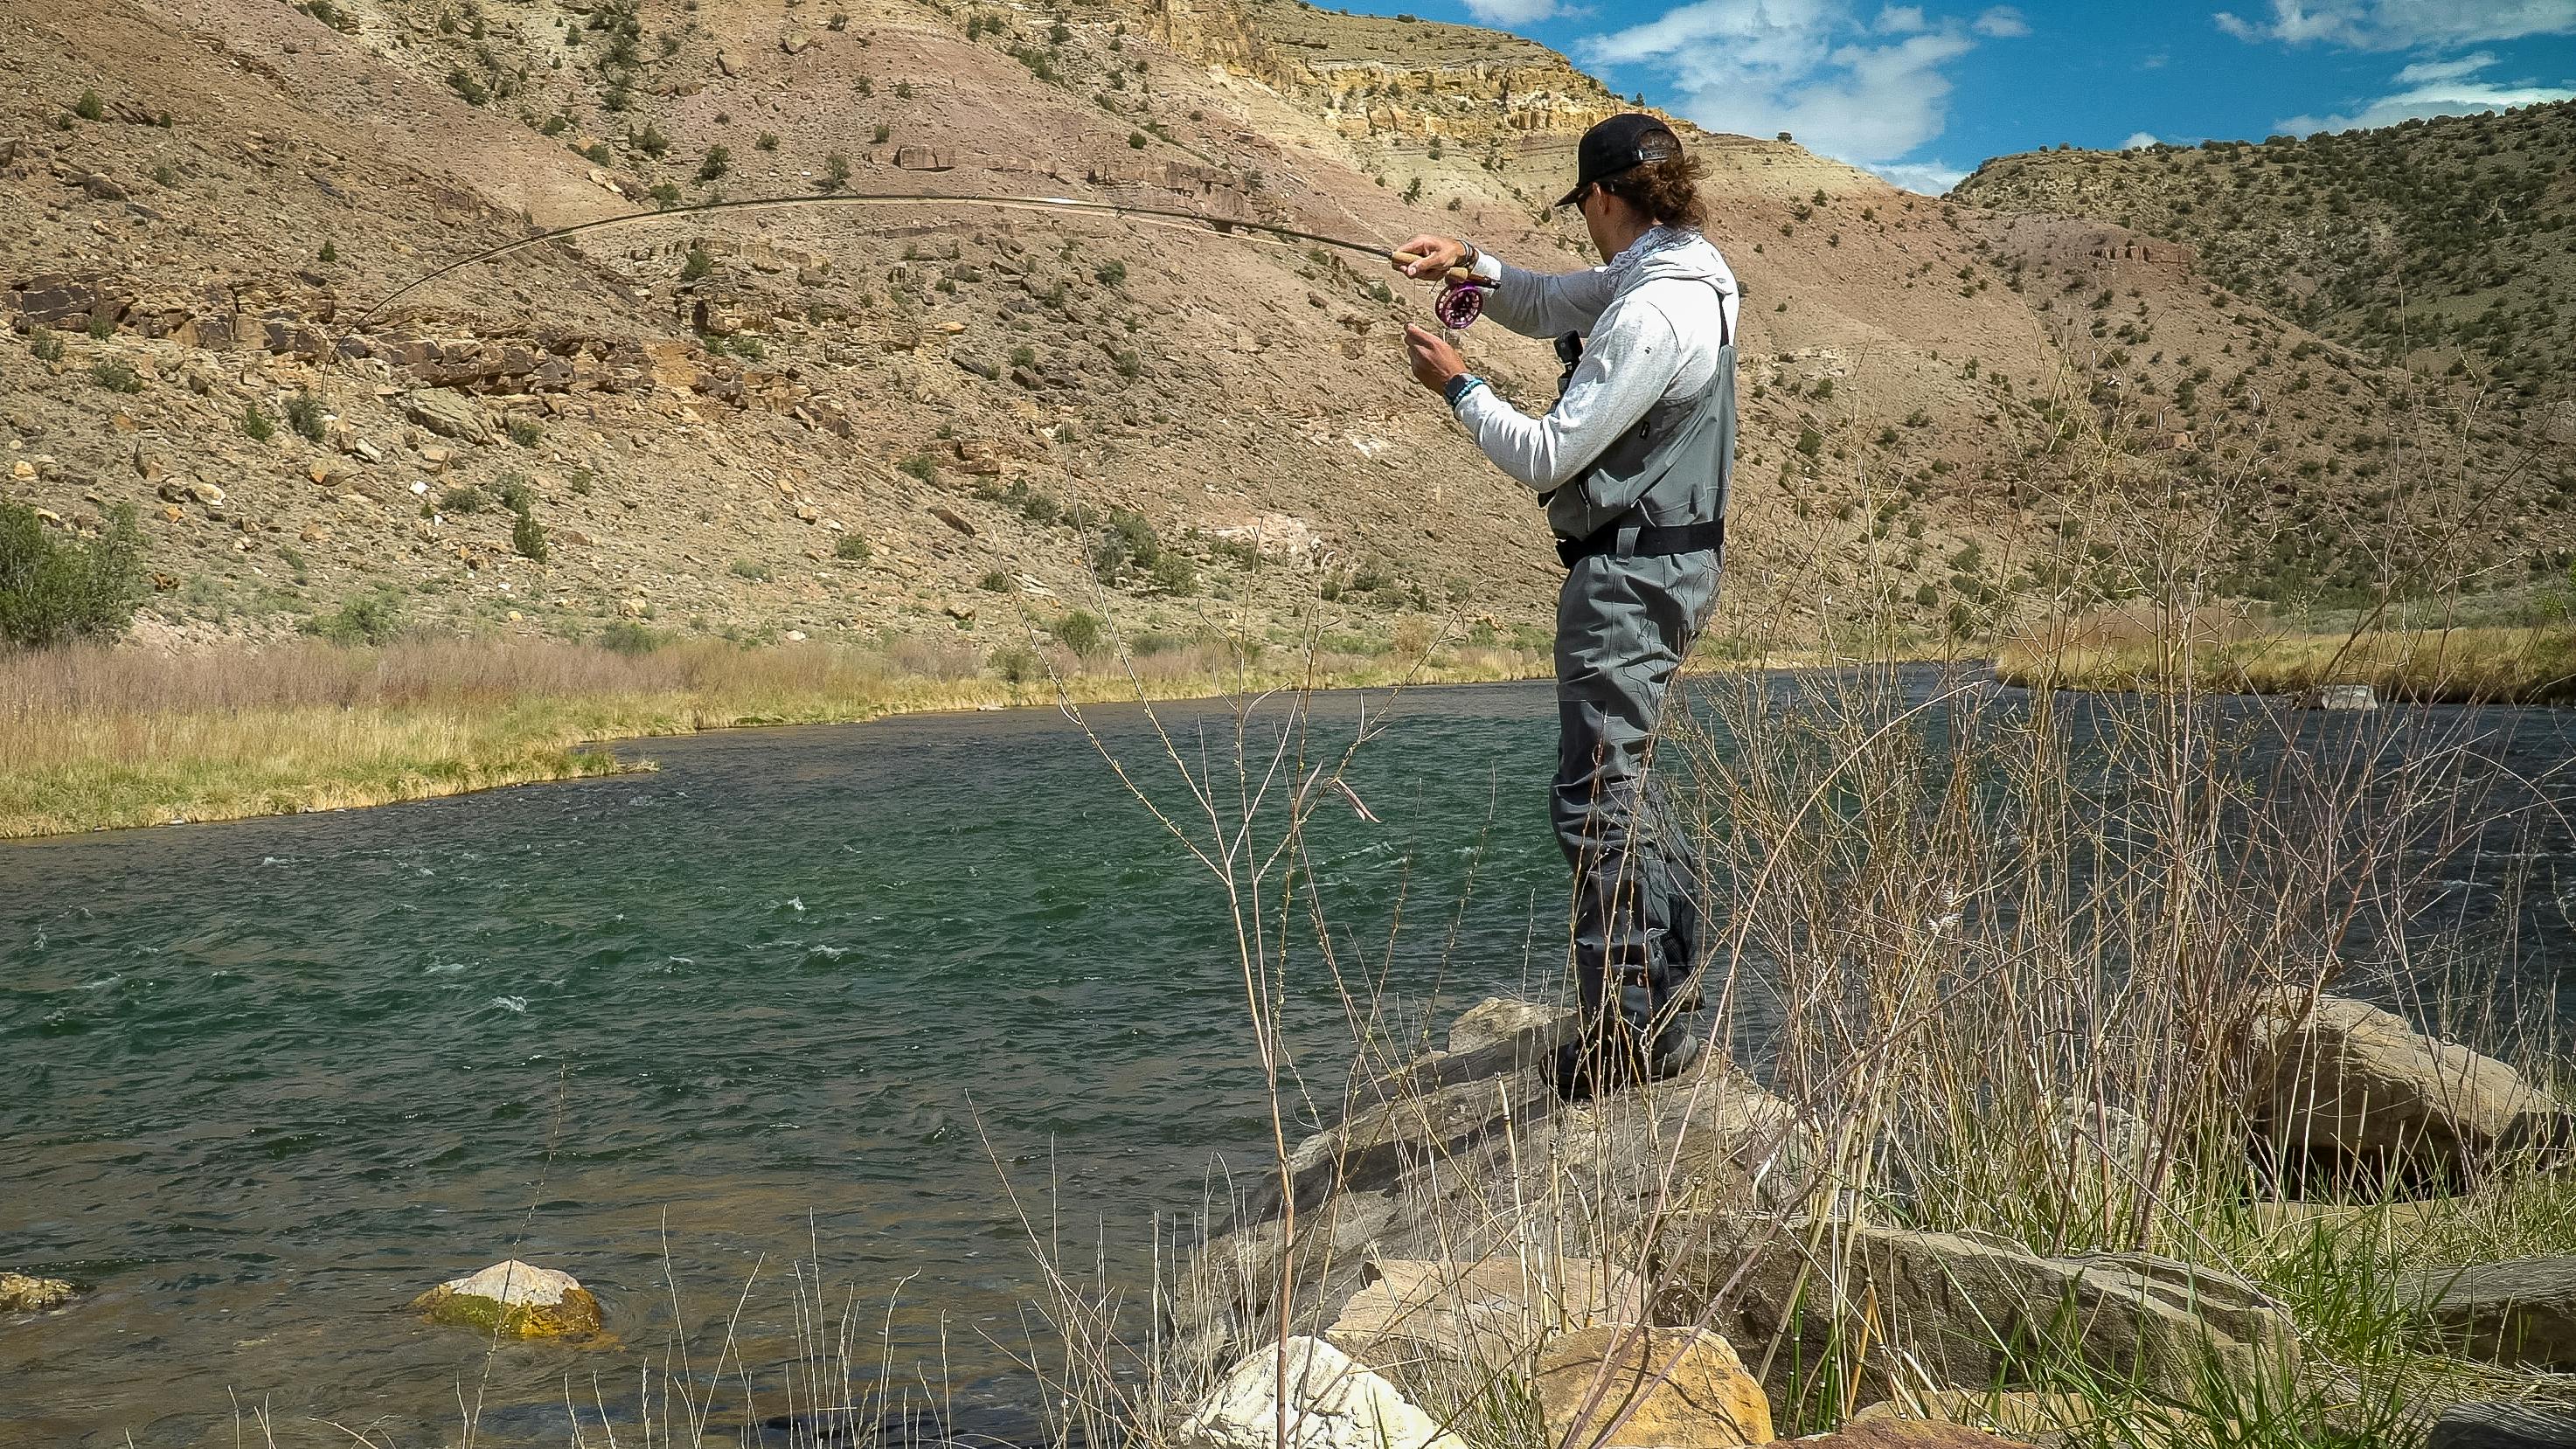 A fisherman standing on a rock and casting a fishing rod into a river.